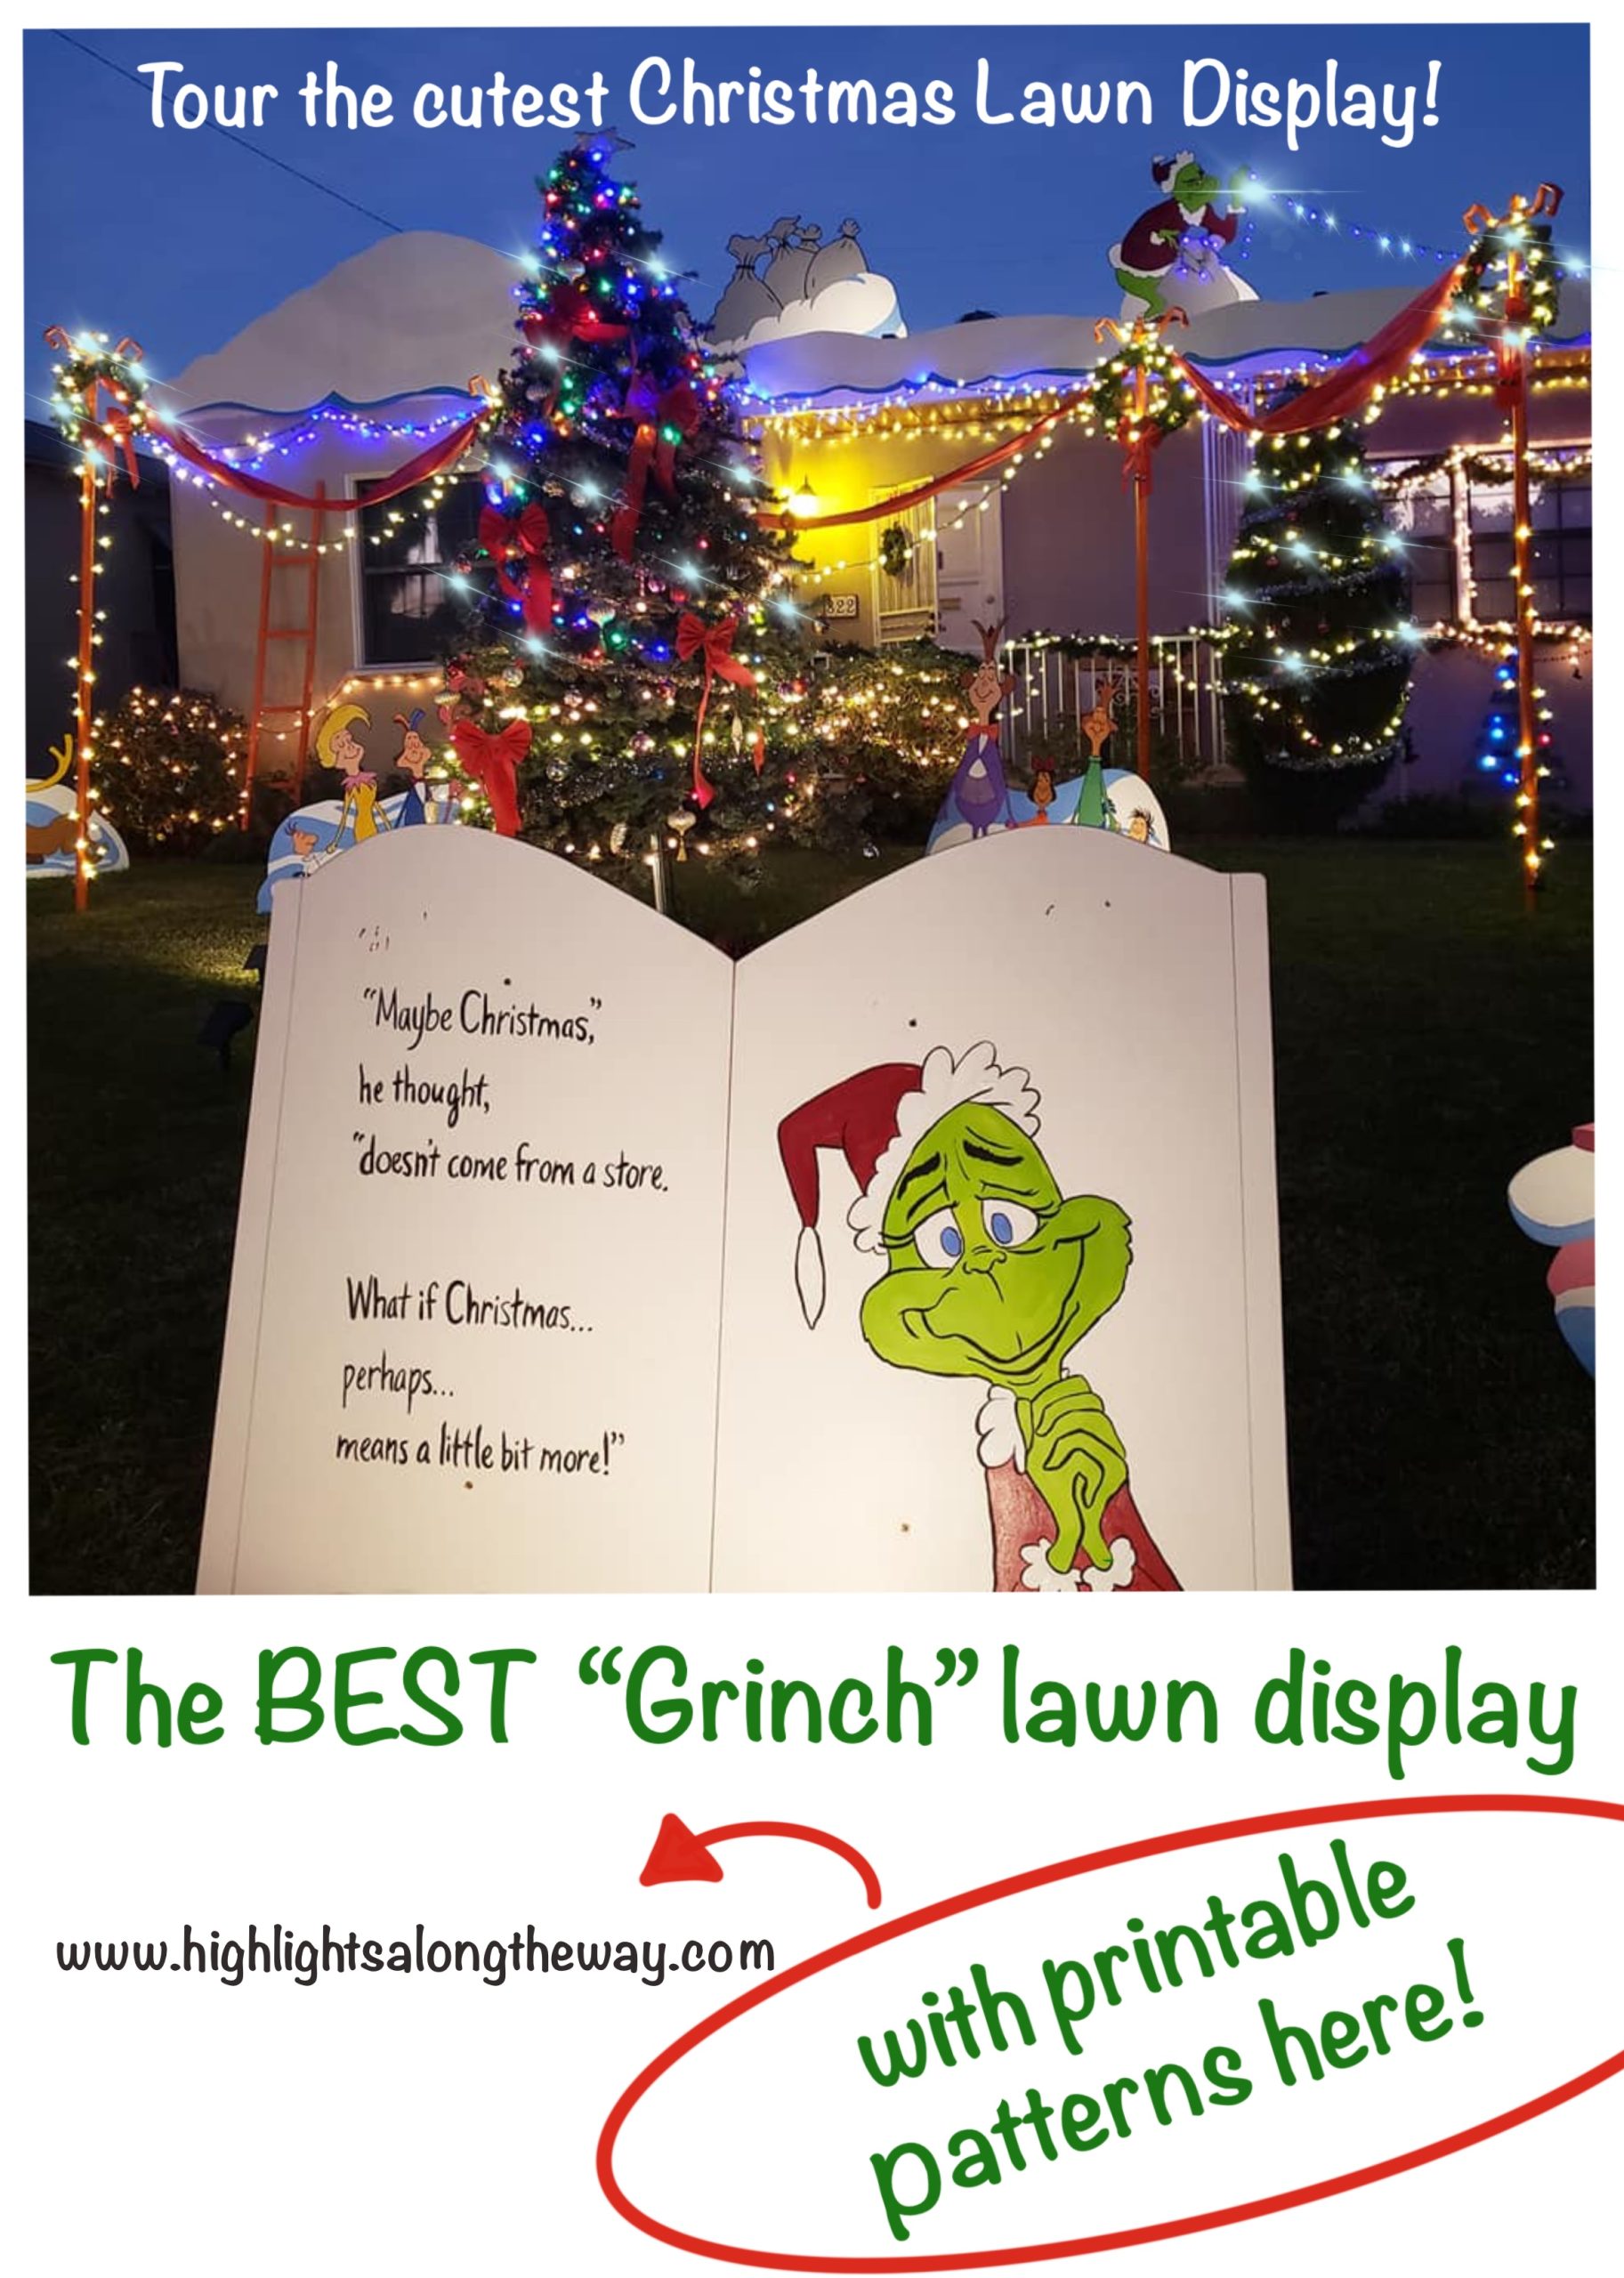 https://highlightsalongtheway.com/wp-content/uploads/2022/11/Grinch_Lawn_Display_Whoville-scaled.jpg